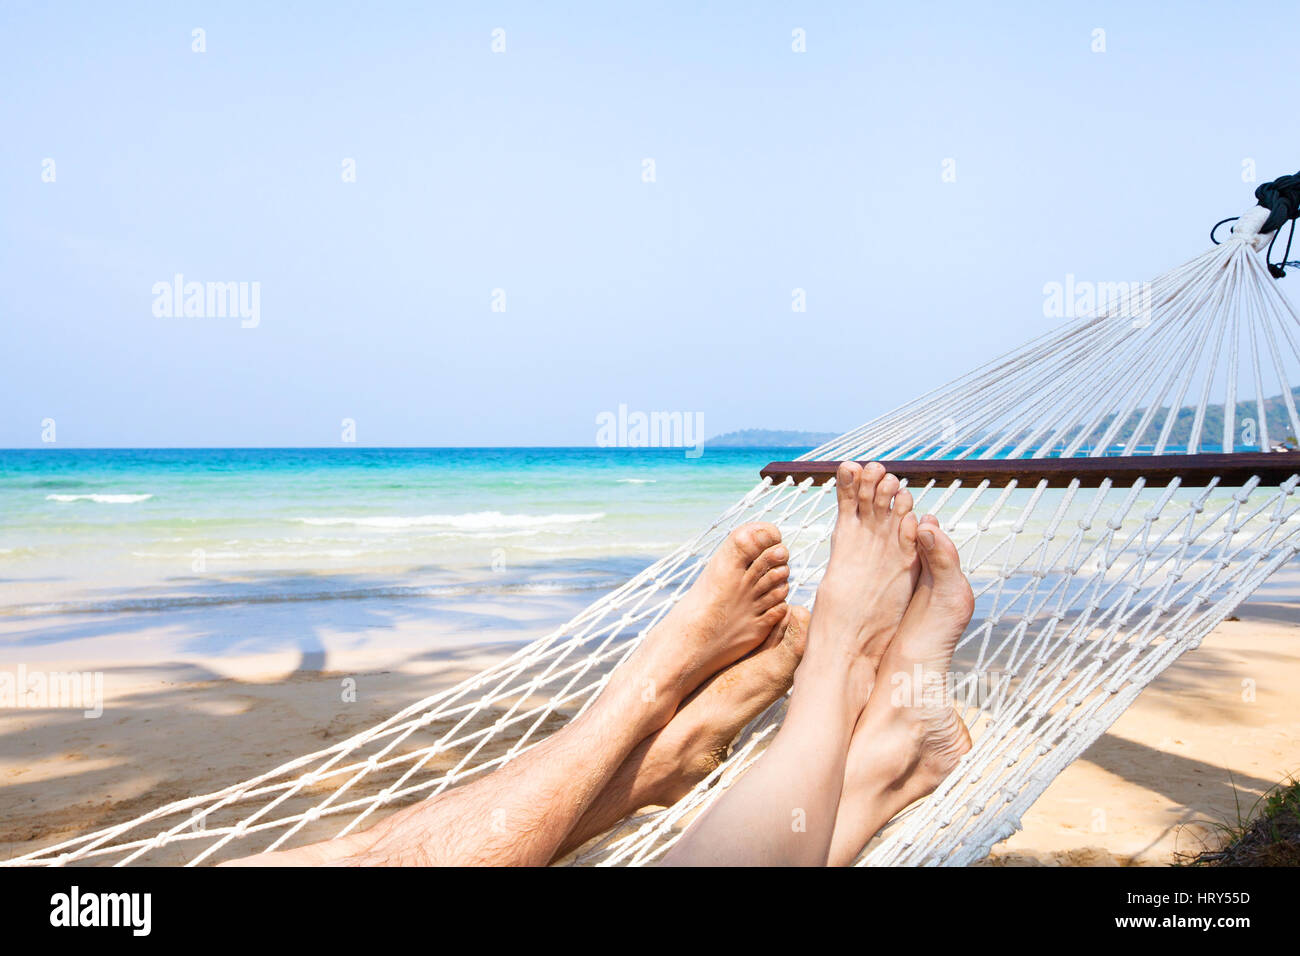 family holidays on the beach, feet of couple in hammock, relaxation background Stock Photo